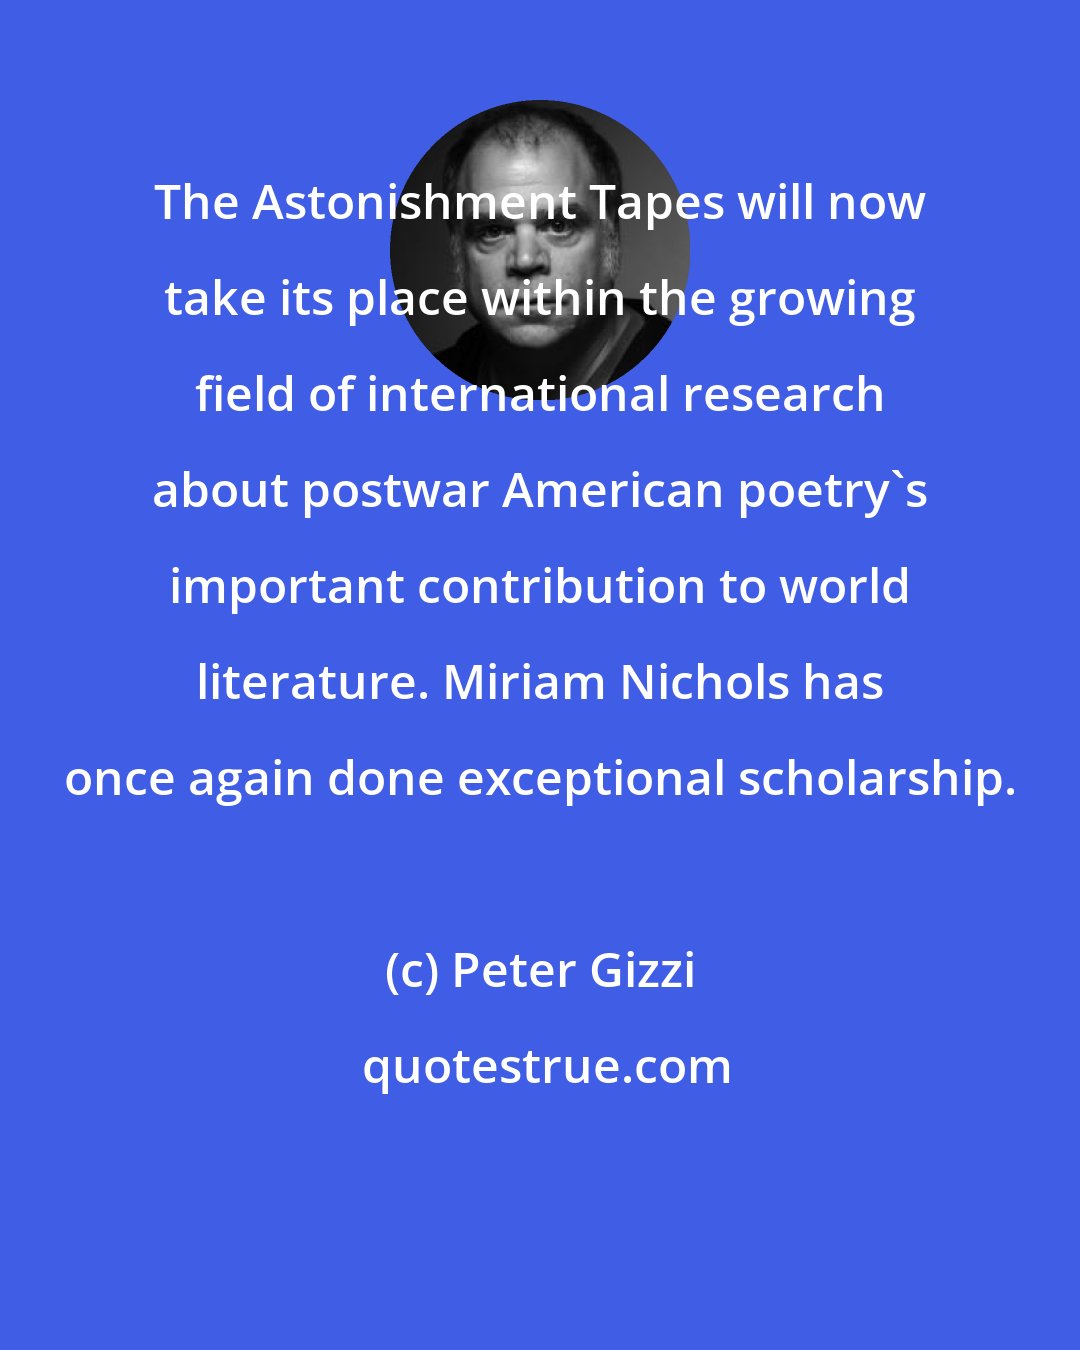 Peter Gizzi: The Astonishment Tapes will now take its place within the growing field of international research about postwar American poetry's important contribution to world literature. Miriam Nichols has once again done exceptional scholarship.